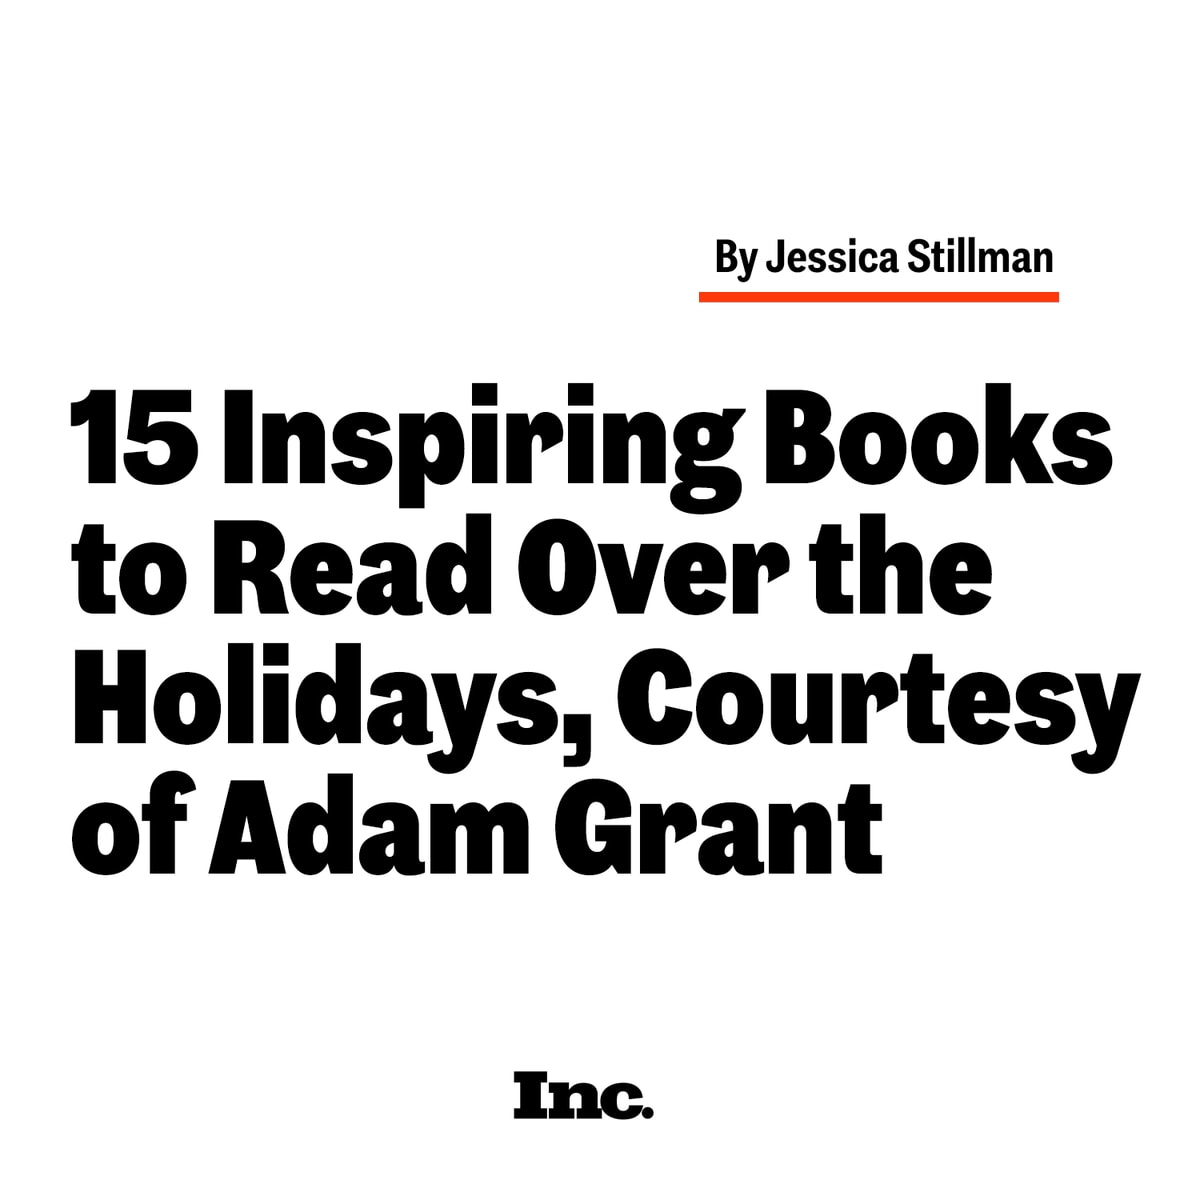 Books make great gifts.